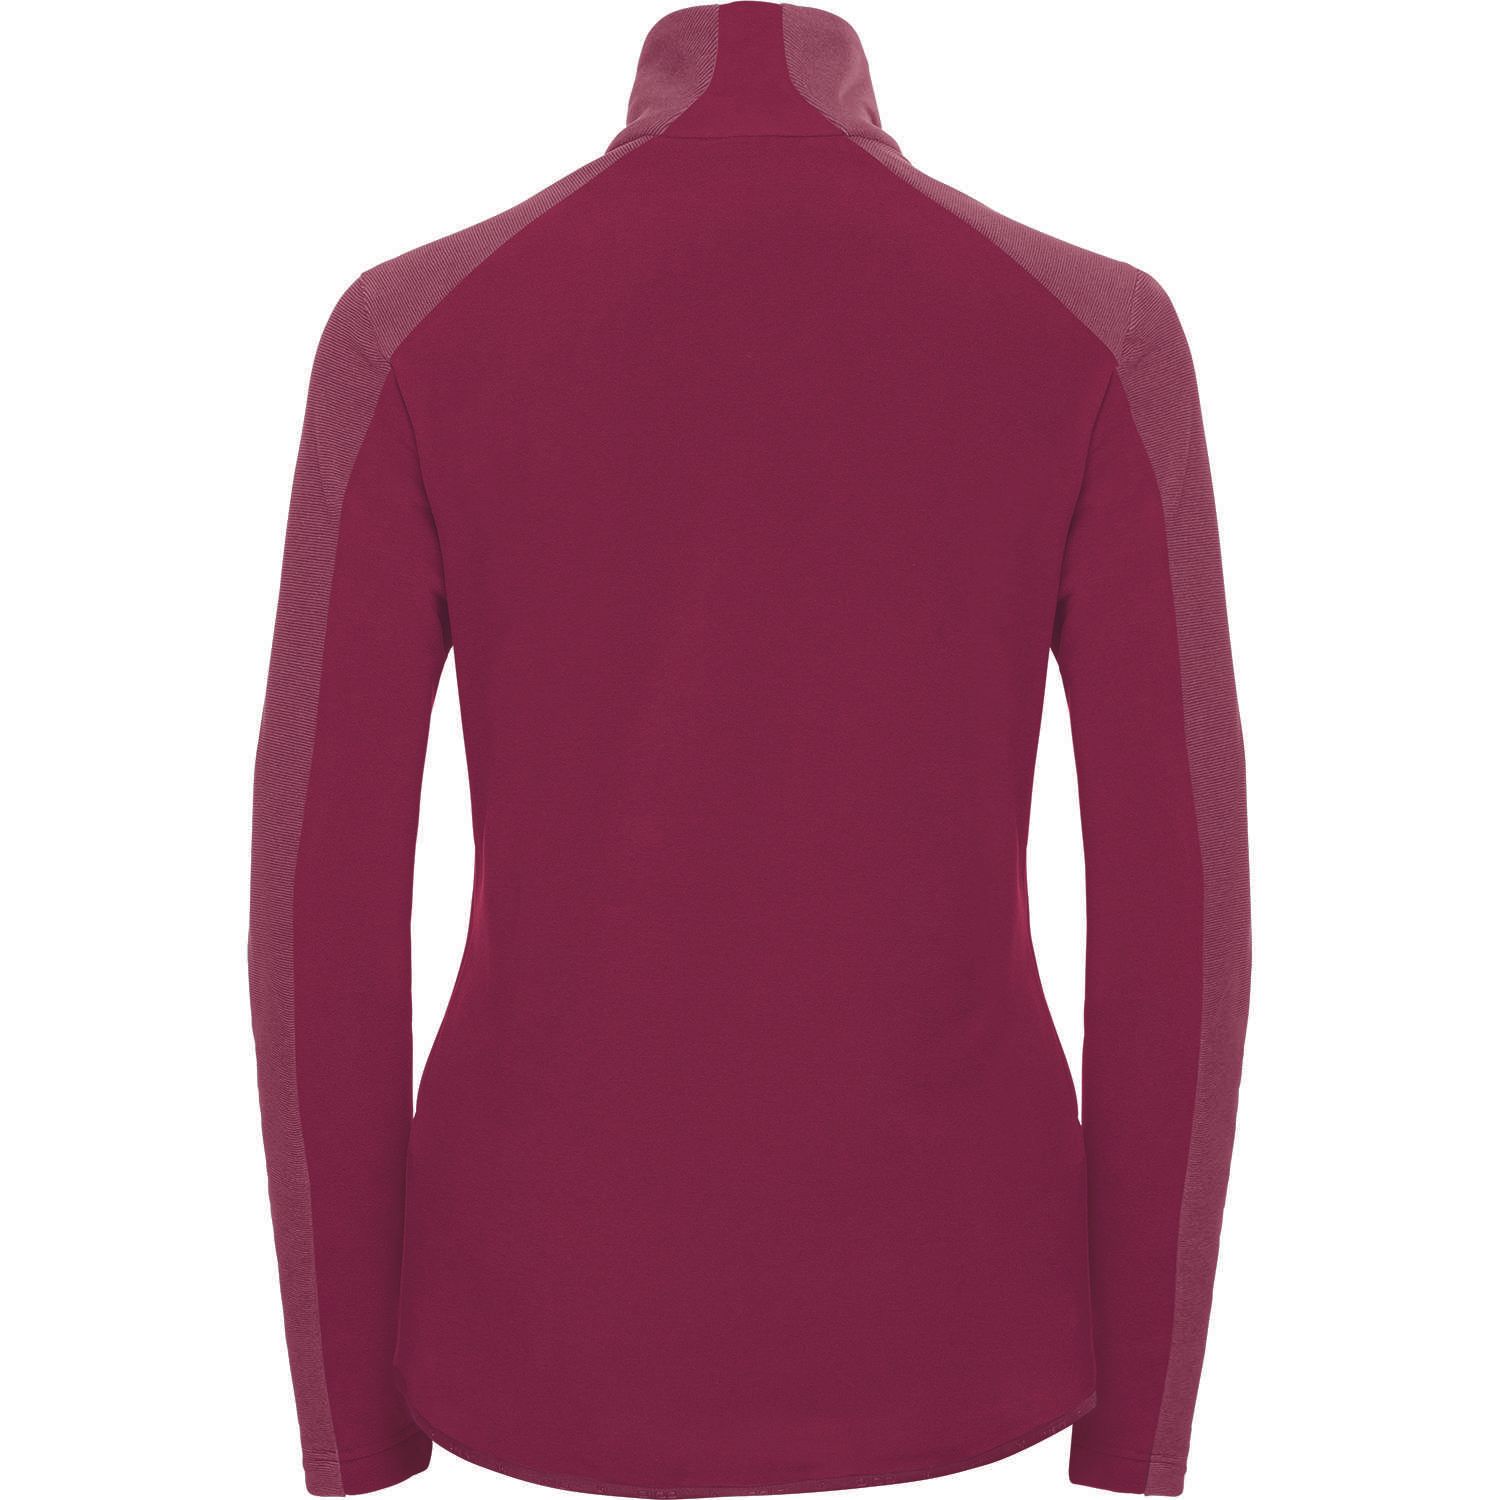 Pull polaire Royale Femme - Rumba Red/Mesa Rose